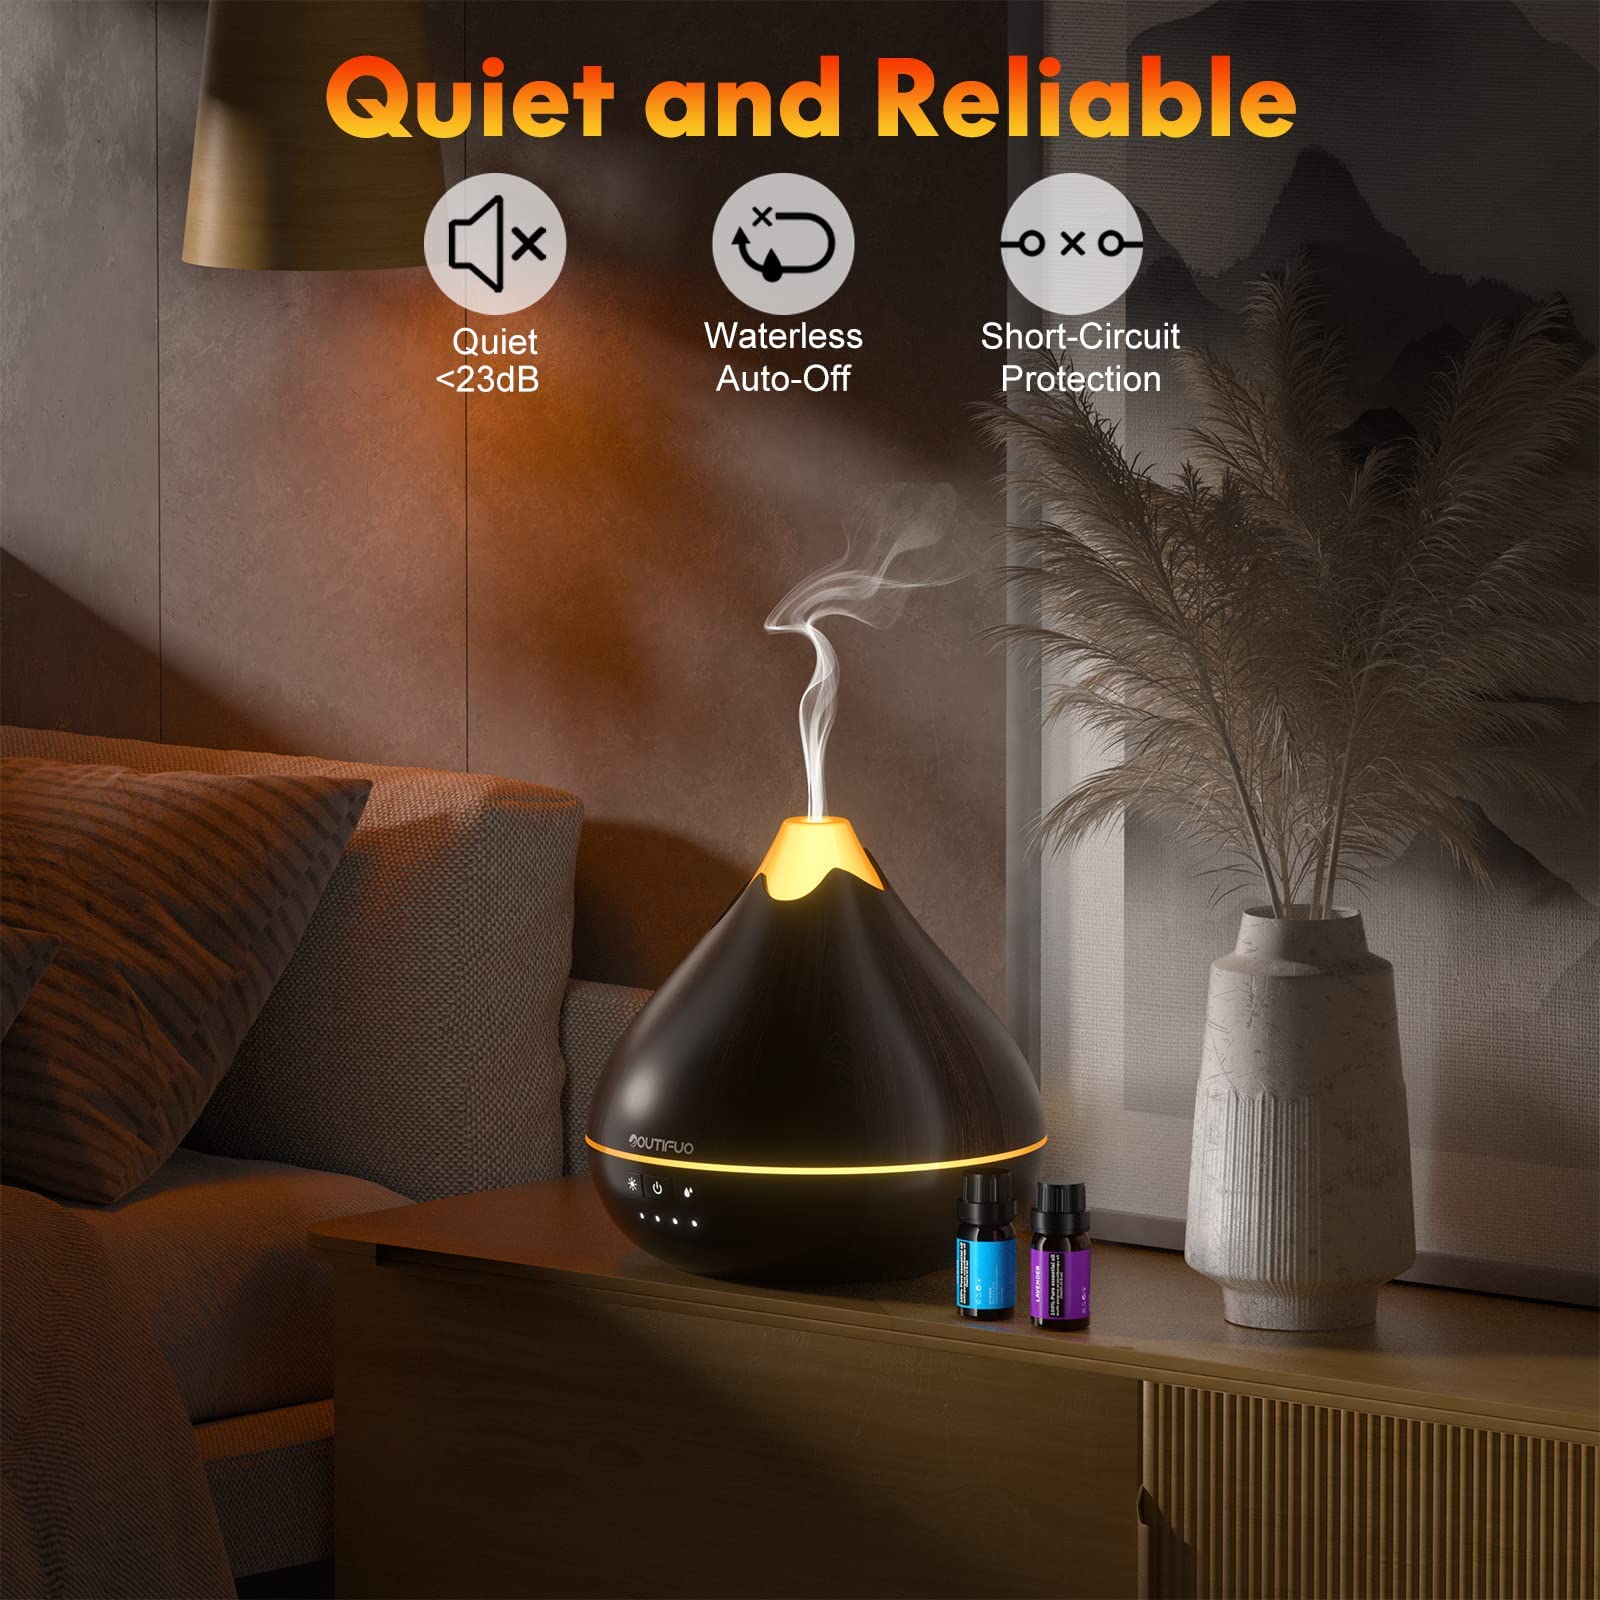 Essential Oil Diffusers 550ml ,10 Essential Oils Diffuser Gift Set,Advanced Ceramic Ultrasonic Technology Aromatherapy Diffusers Auto Shut-Off for 15 Ambient Light Settings（Black）